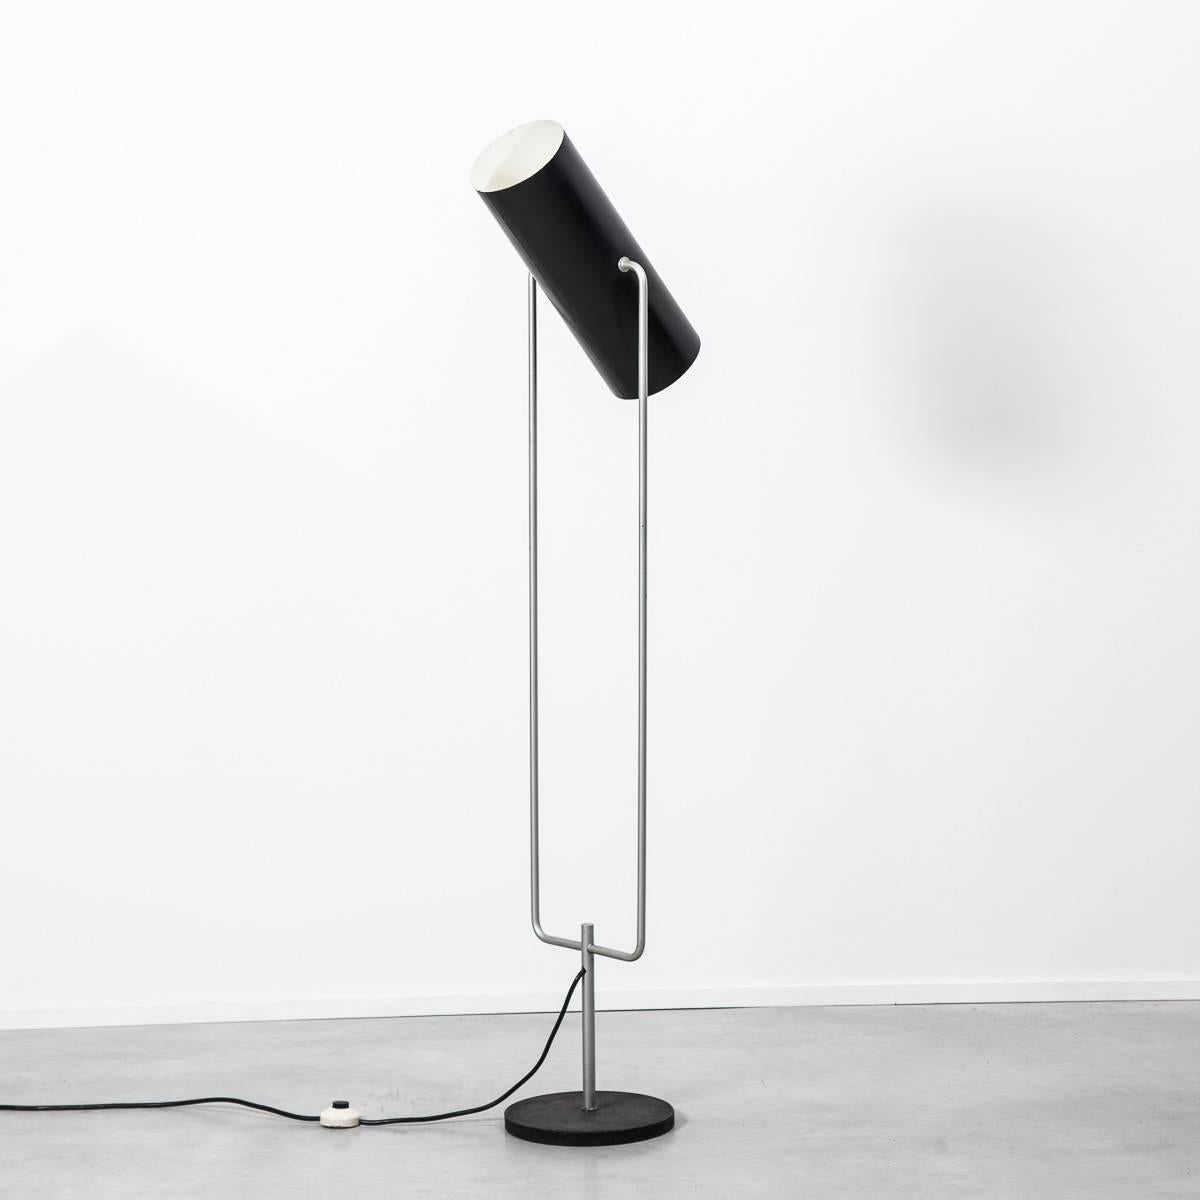 Raak tube floor lamp model D2300, made circa 1960 by Raak, Netherlands. Striking rare floor lamp with double lit adjustable tube shade. The lamp has a fantastic shape and is functional too. The design is attributed to the Raak design team,